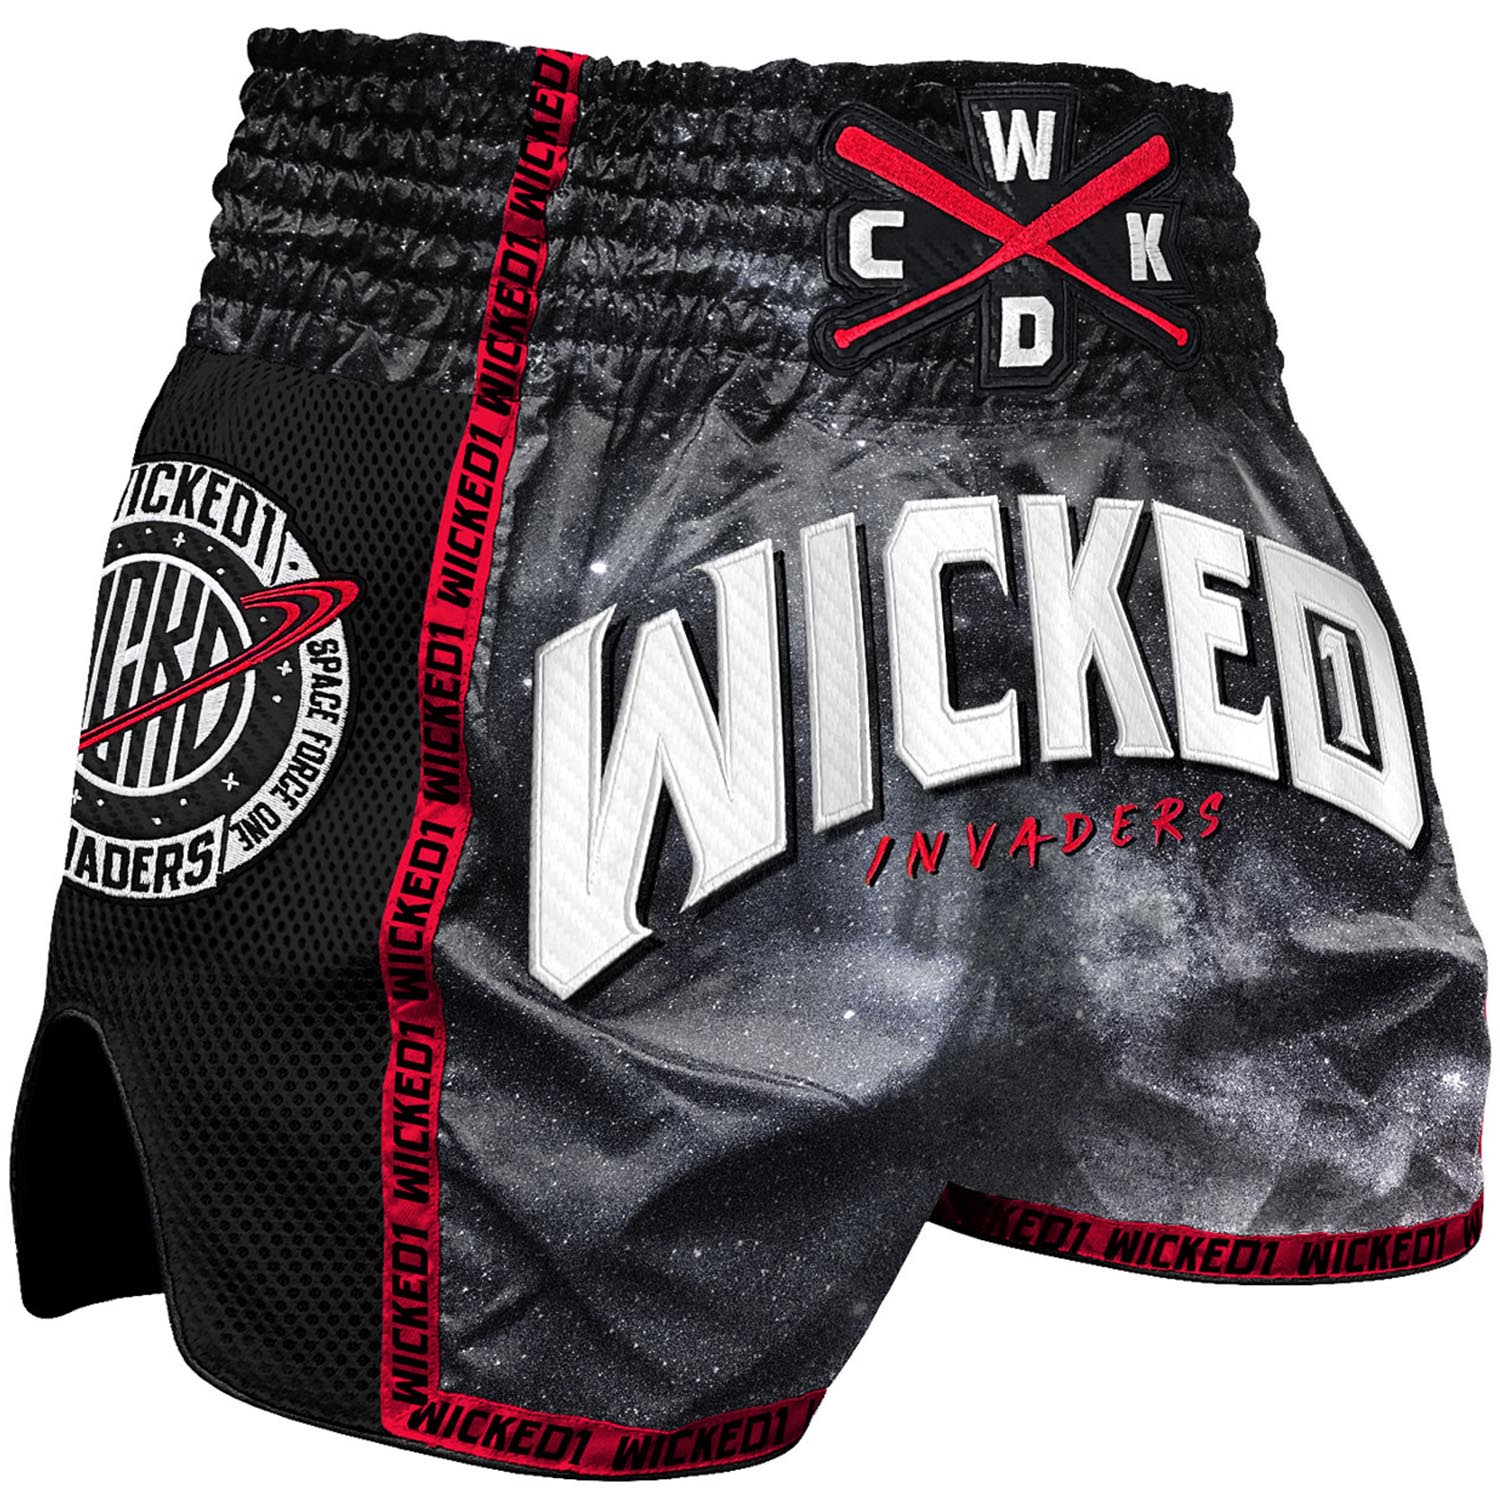 Wicked One Muay Thai Shorts, Invaders, schwarz-rot